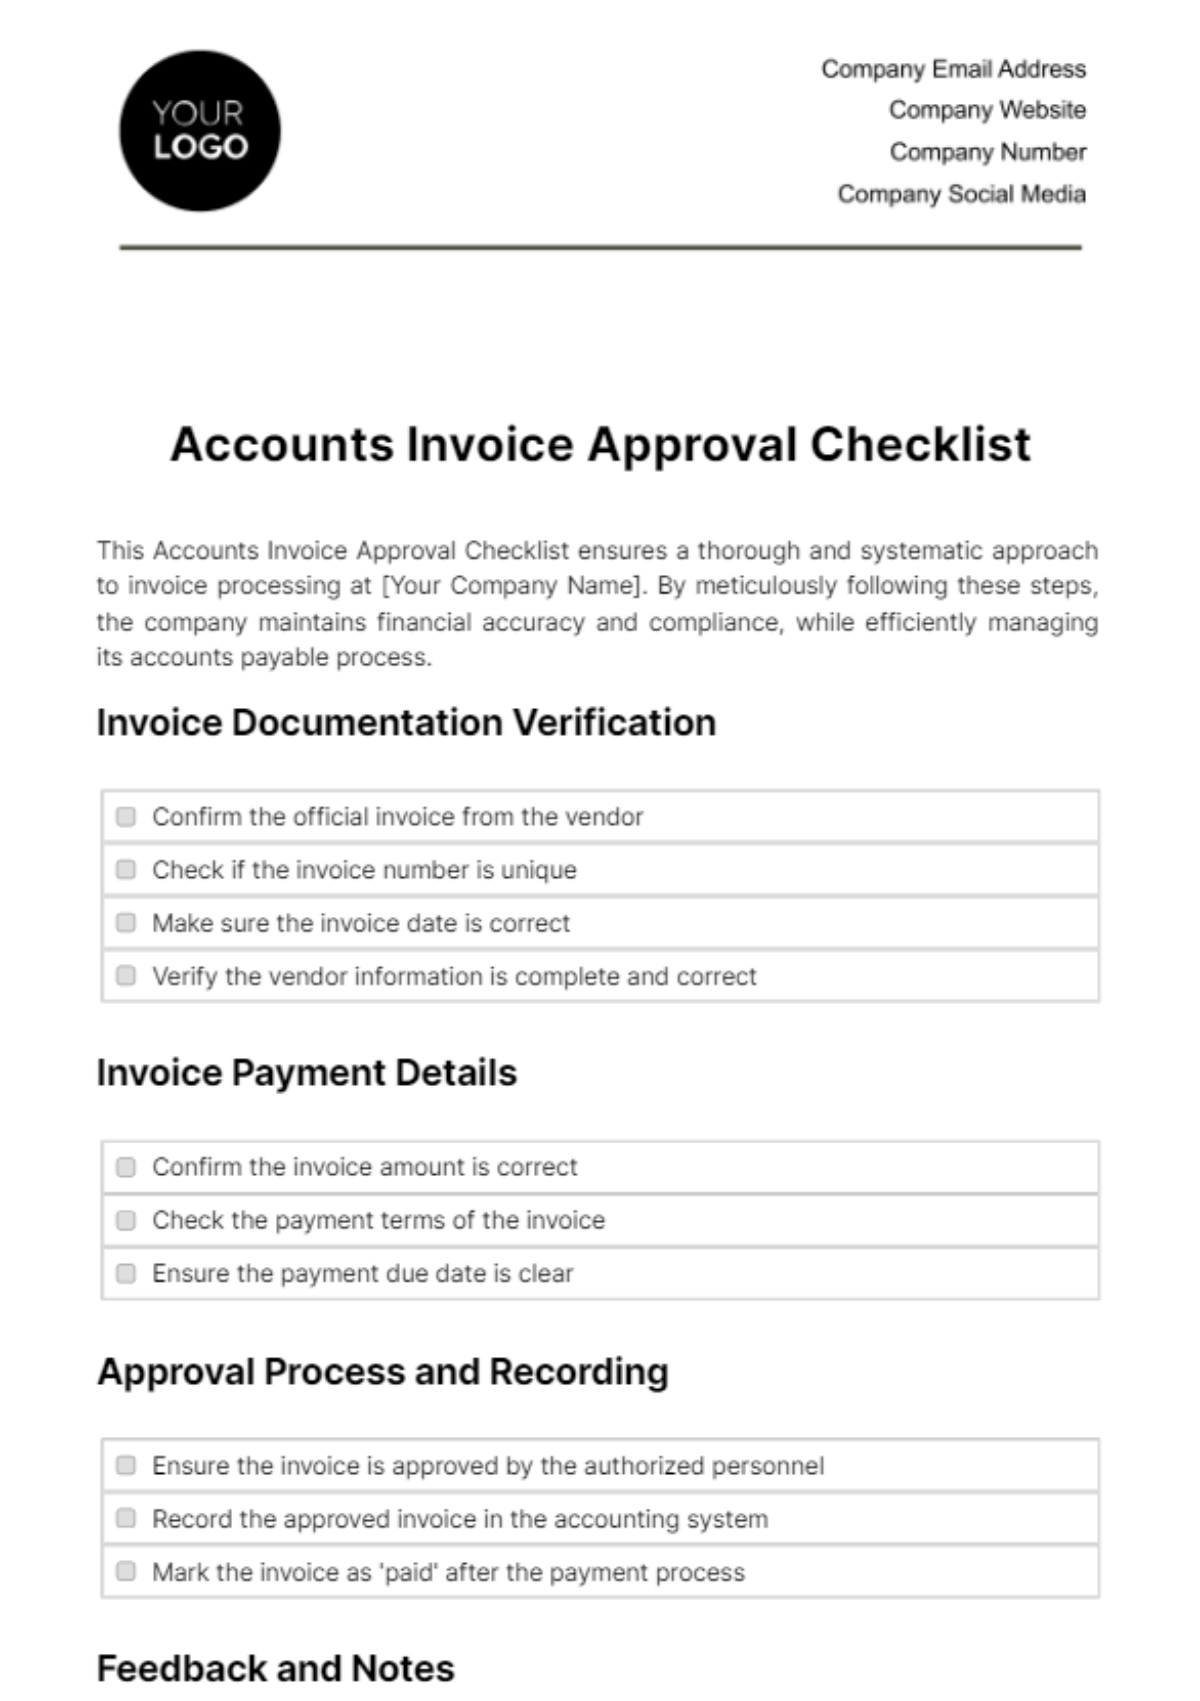 Accounts Invoice Approval Checklist Template